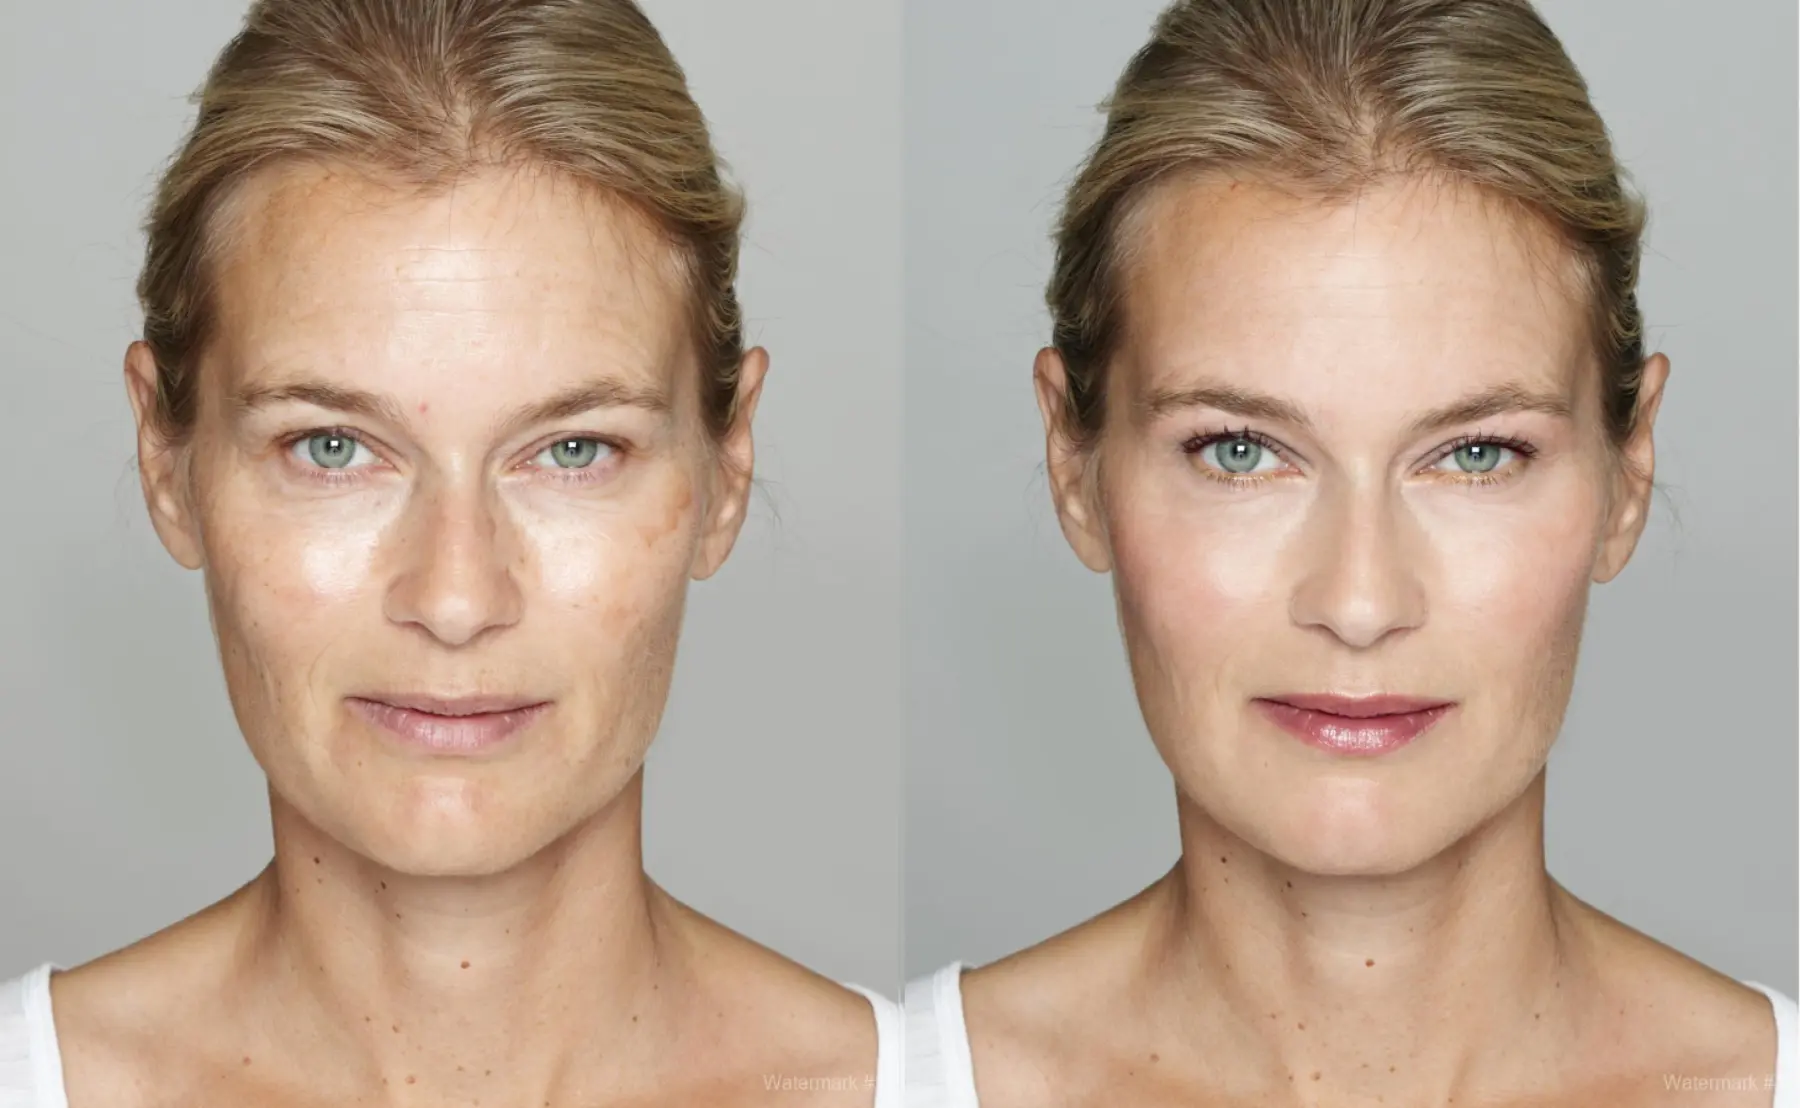 Fillers: Patient 1 - Before and After  